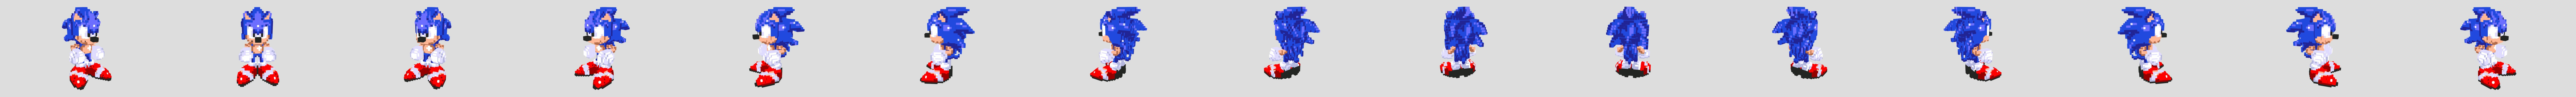 FanArt: Sonic 3D sprite of Sonic 3 and knuckles - Download Free 3D